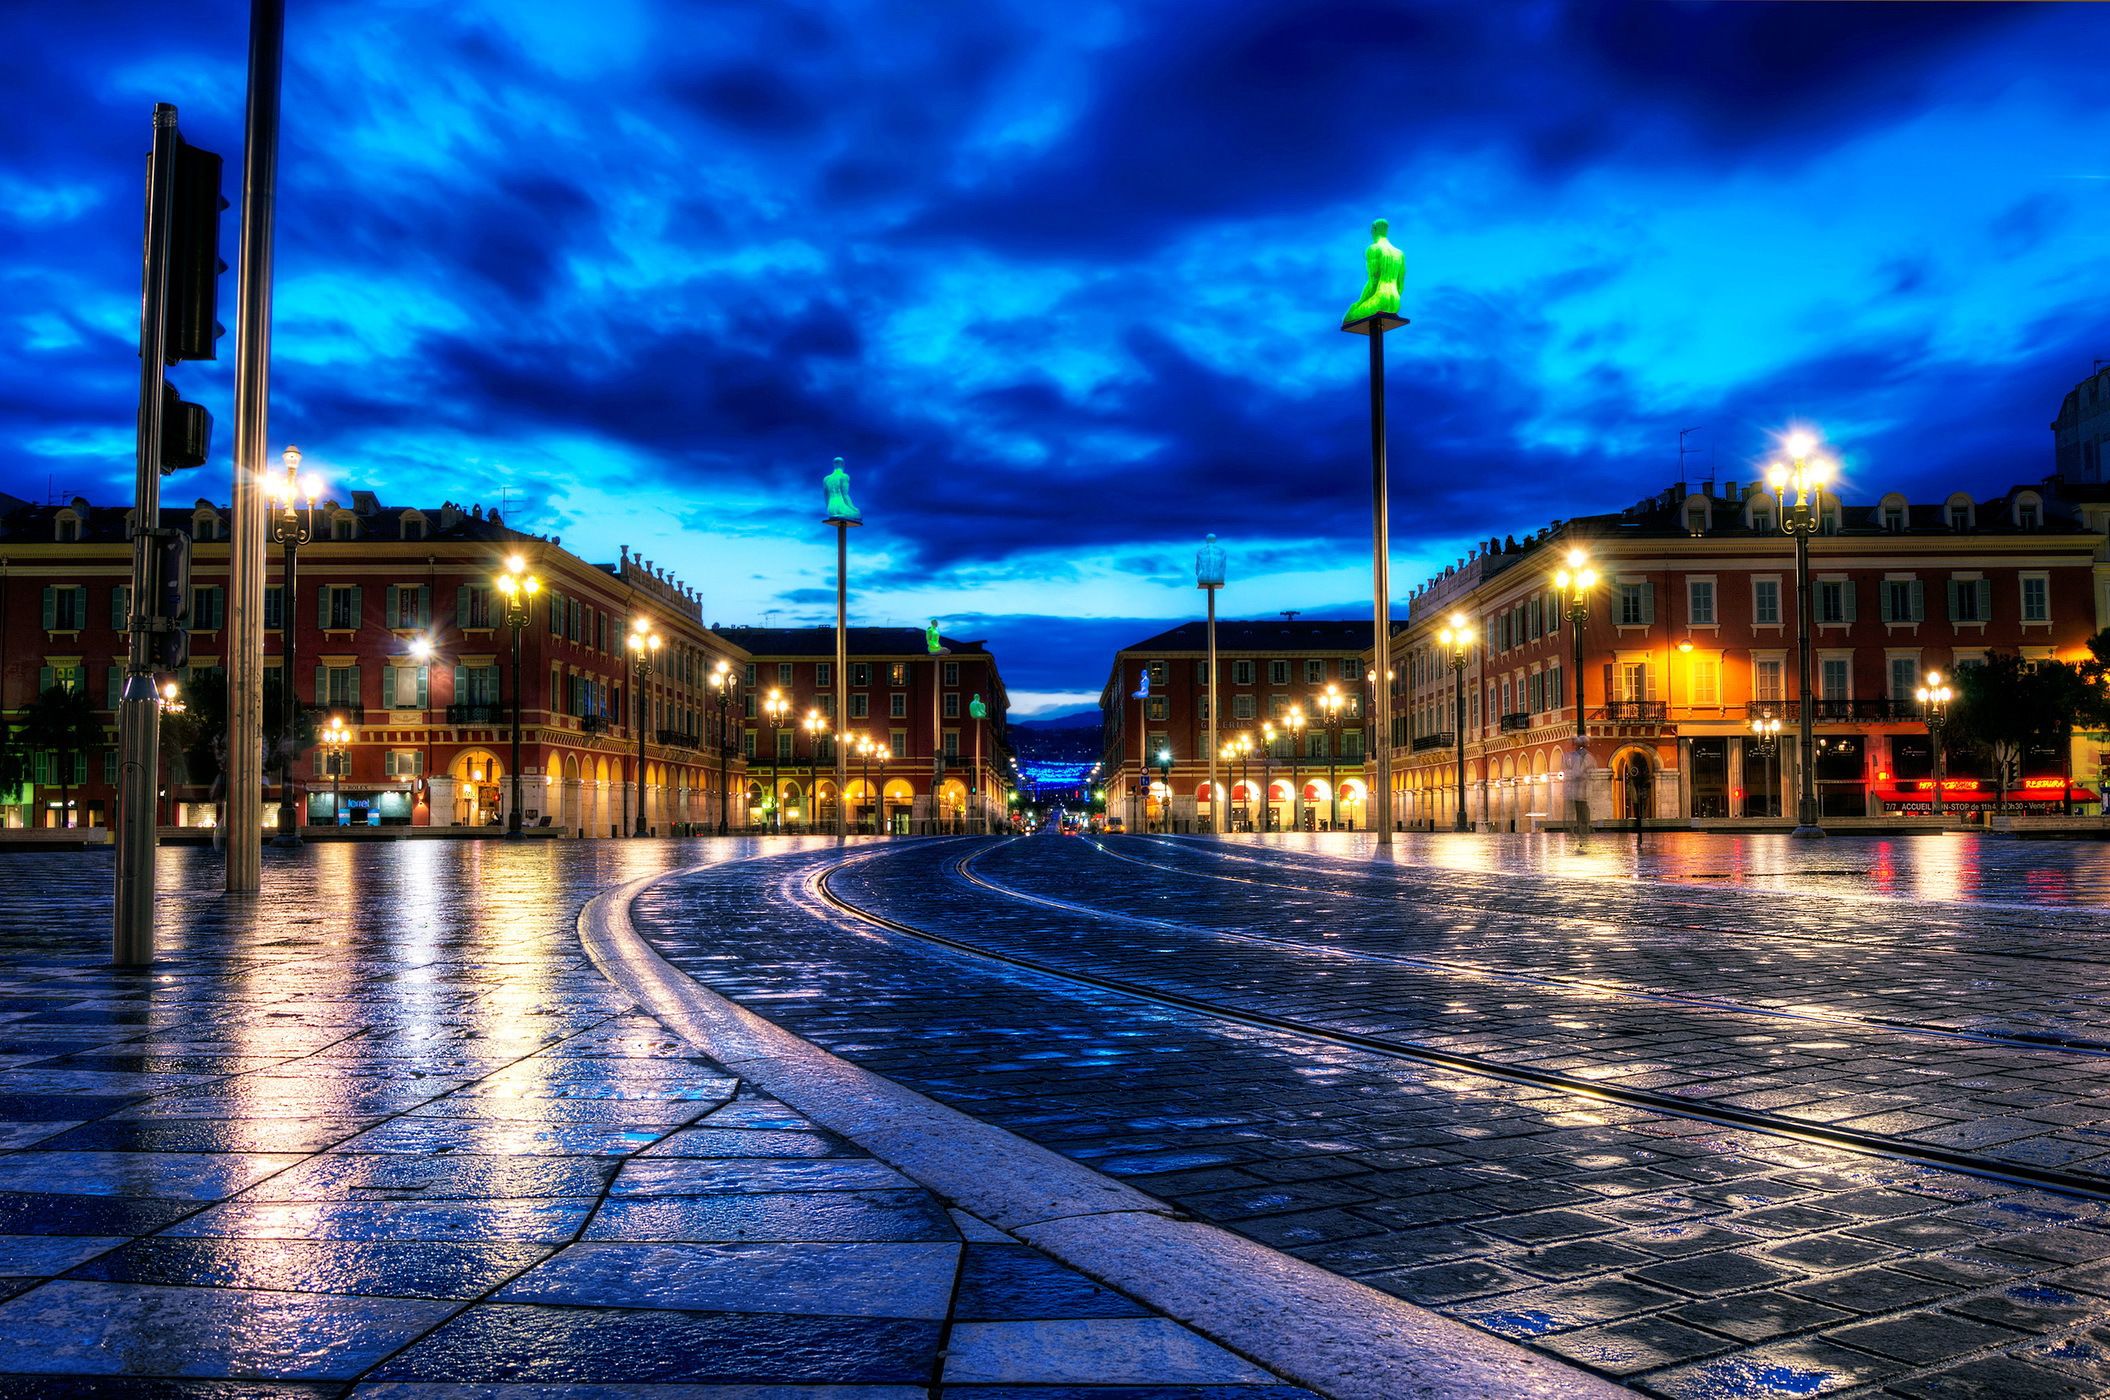 Evening lights in Nice, France wallpaper and image